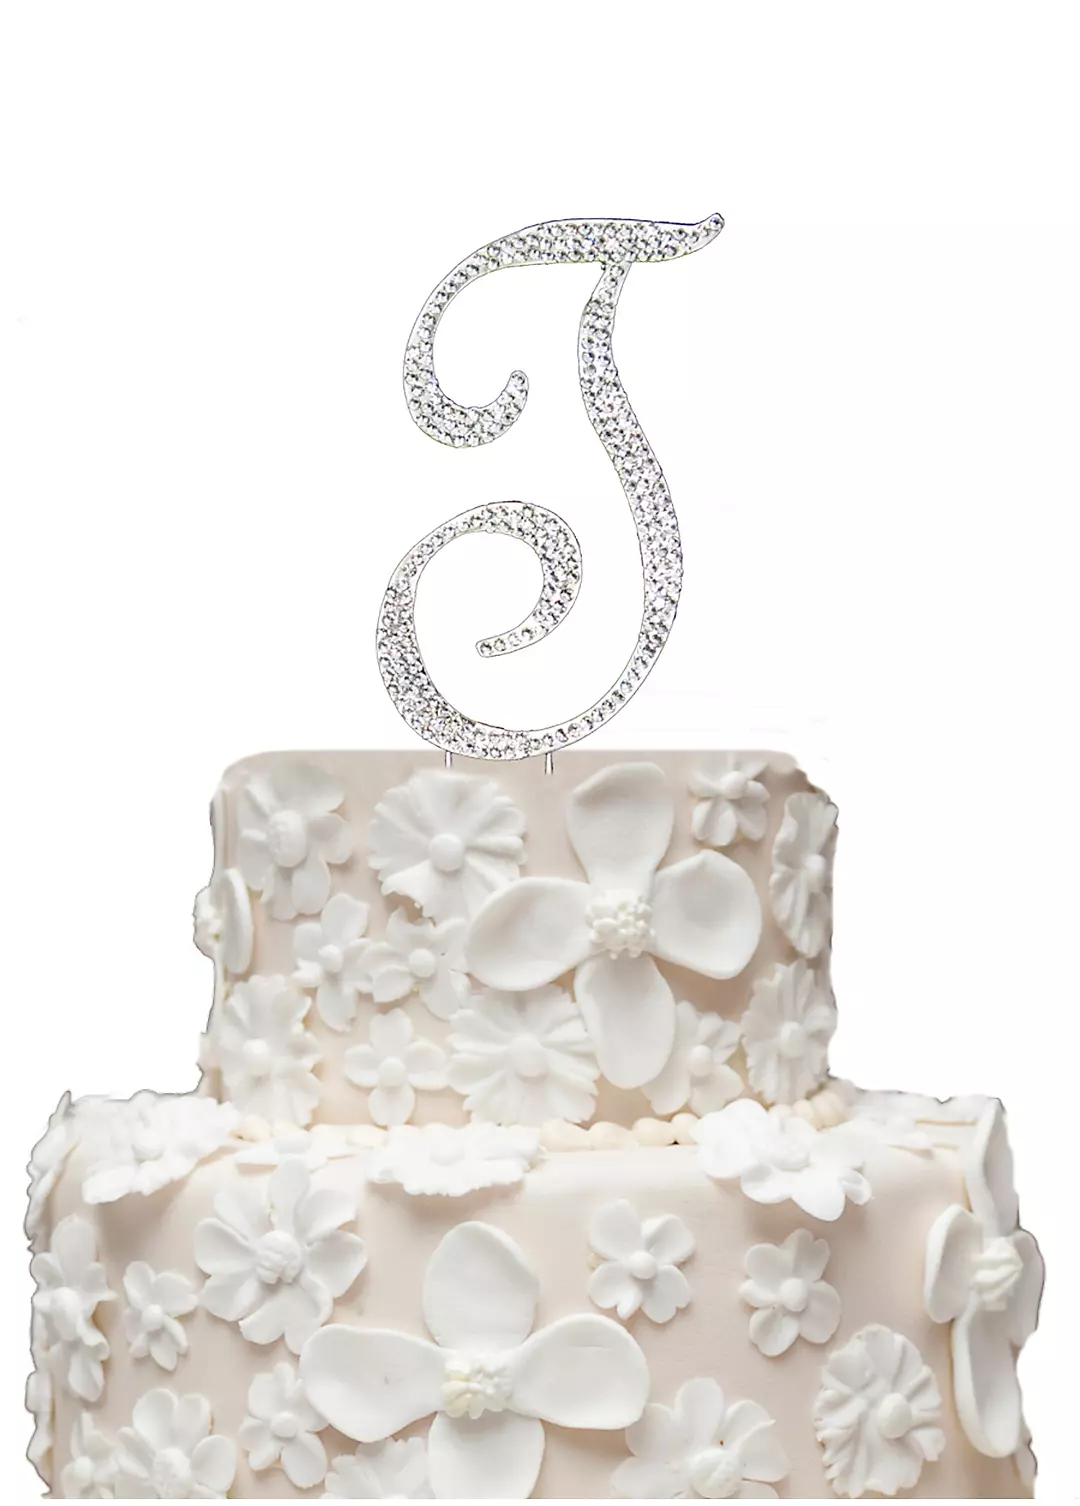 Initial Cake Topper with Swarvoski Crystals Image